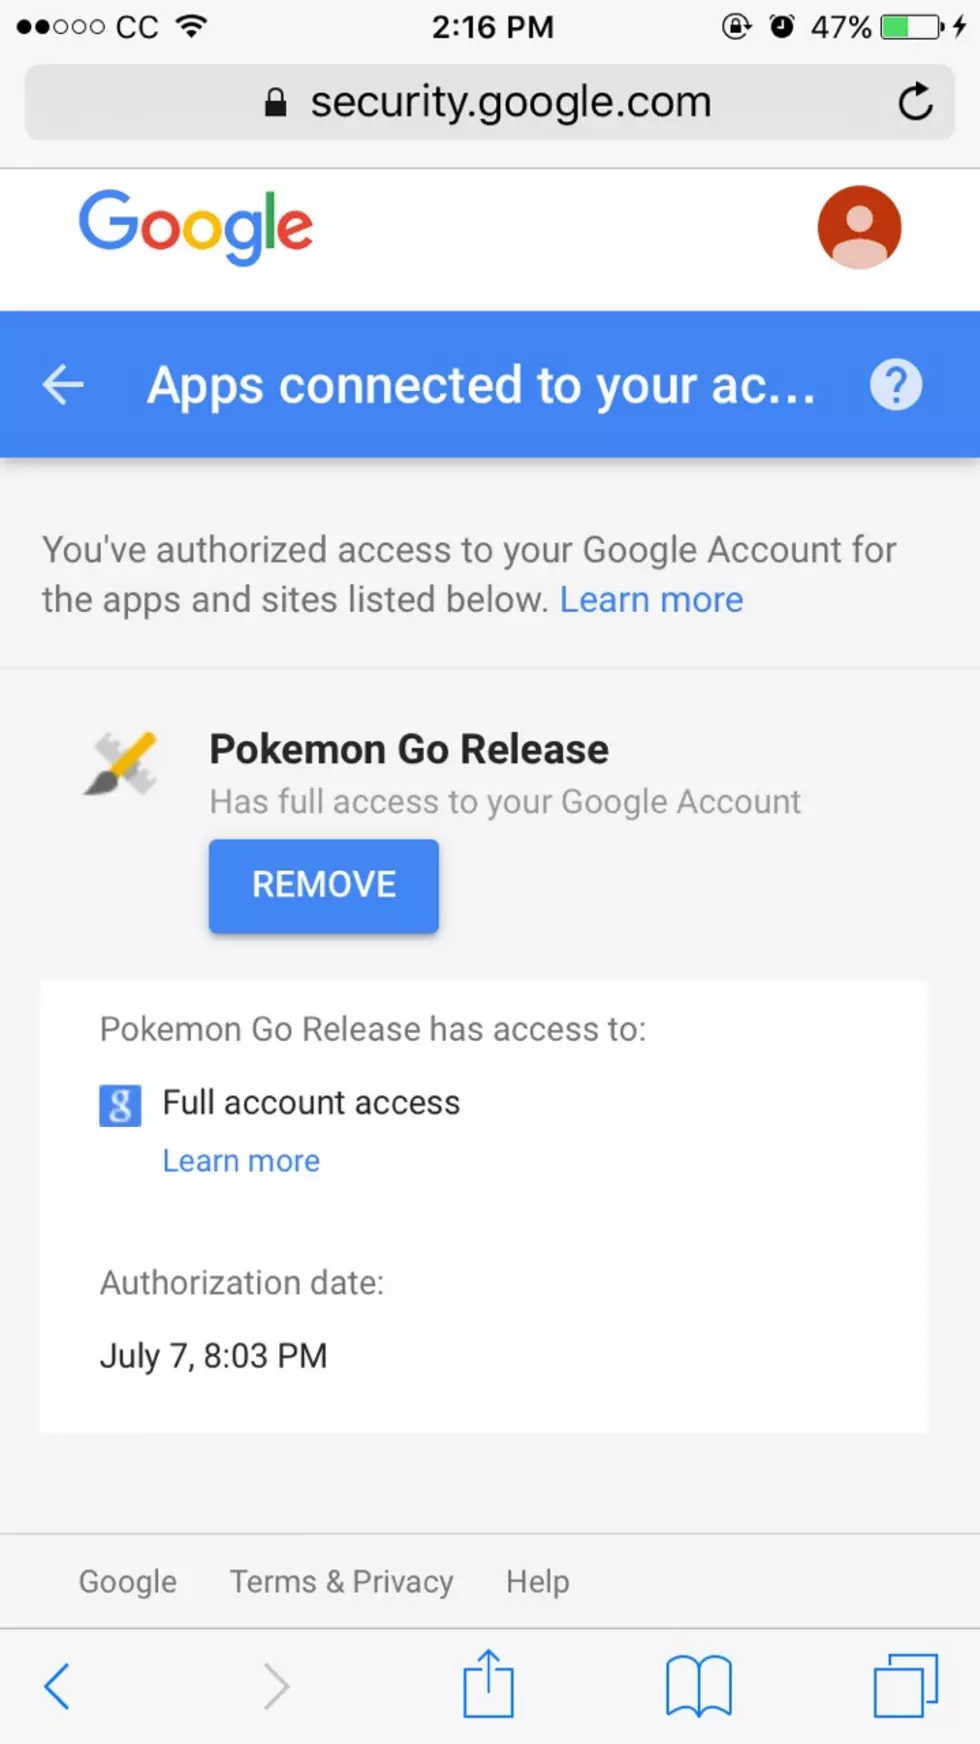 Pokémon GO Is Accessing Your Google Account If You Have An Apple Phone